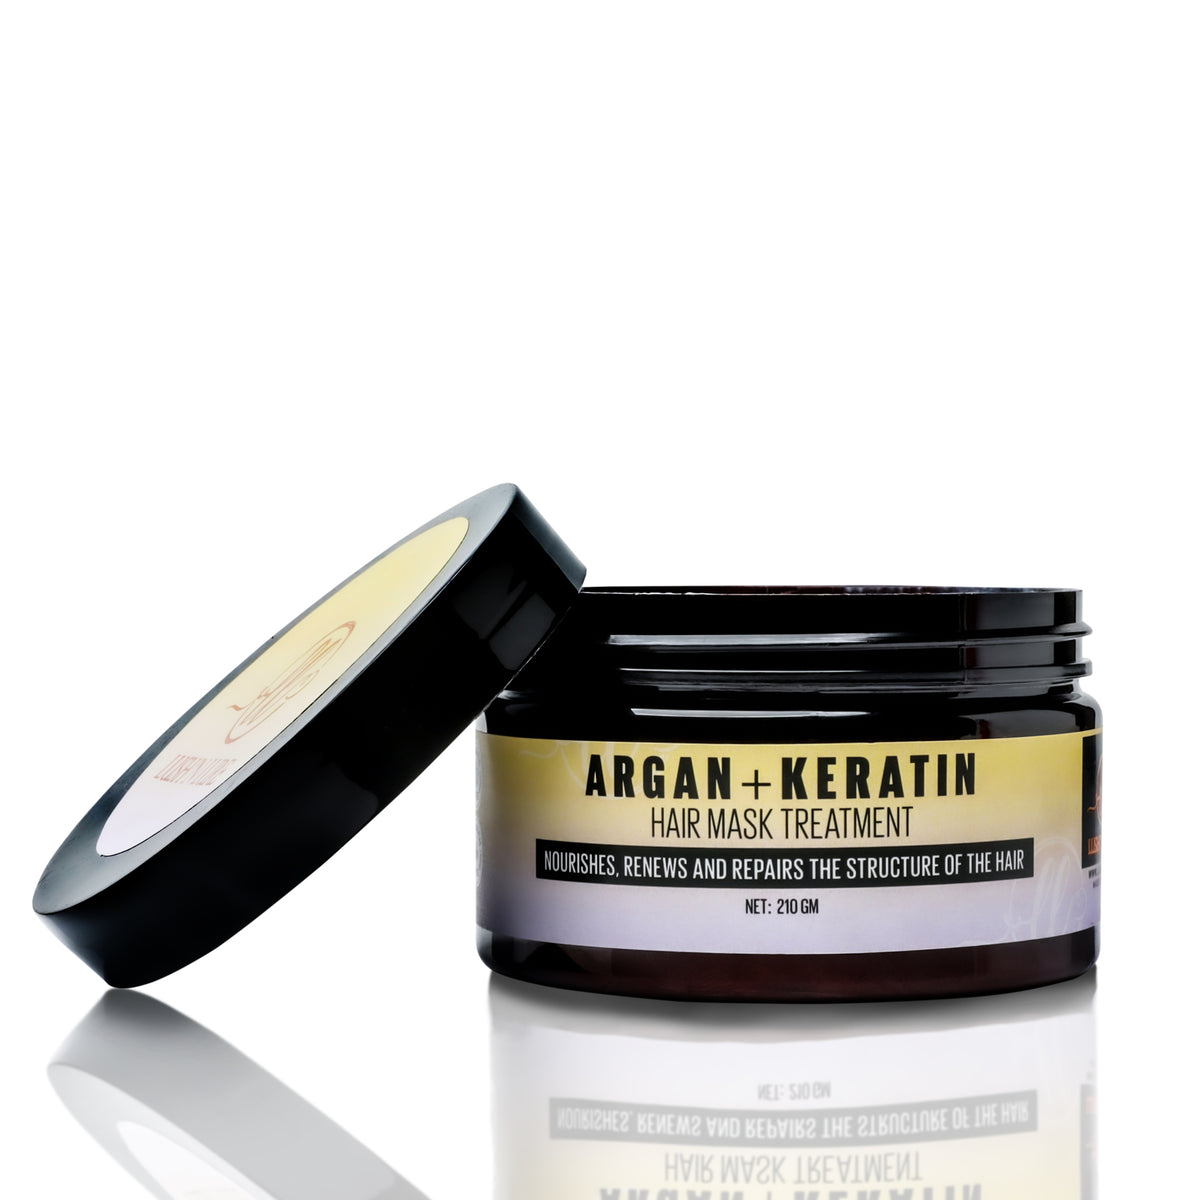  "Image featuring LUSH 'N LURE Argan & Keratin Hair Mask, a luxurious treatment for hair enriched with argan oil and keratin for deep conditioning and repair."